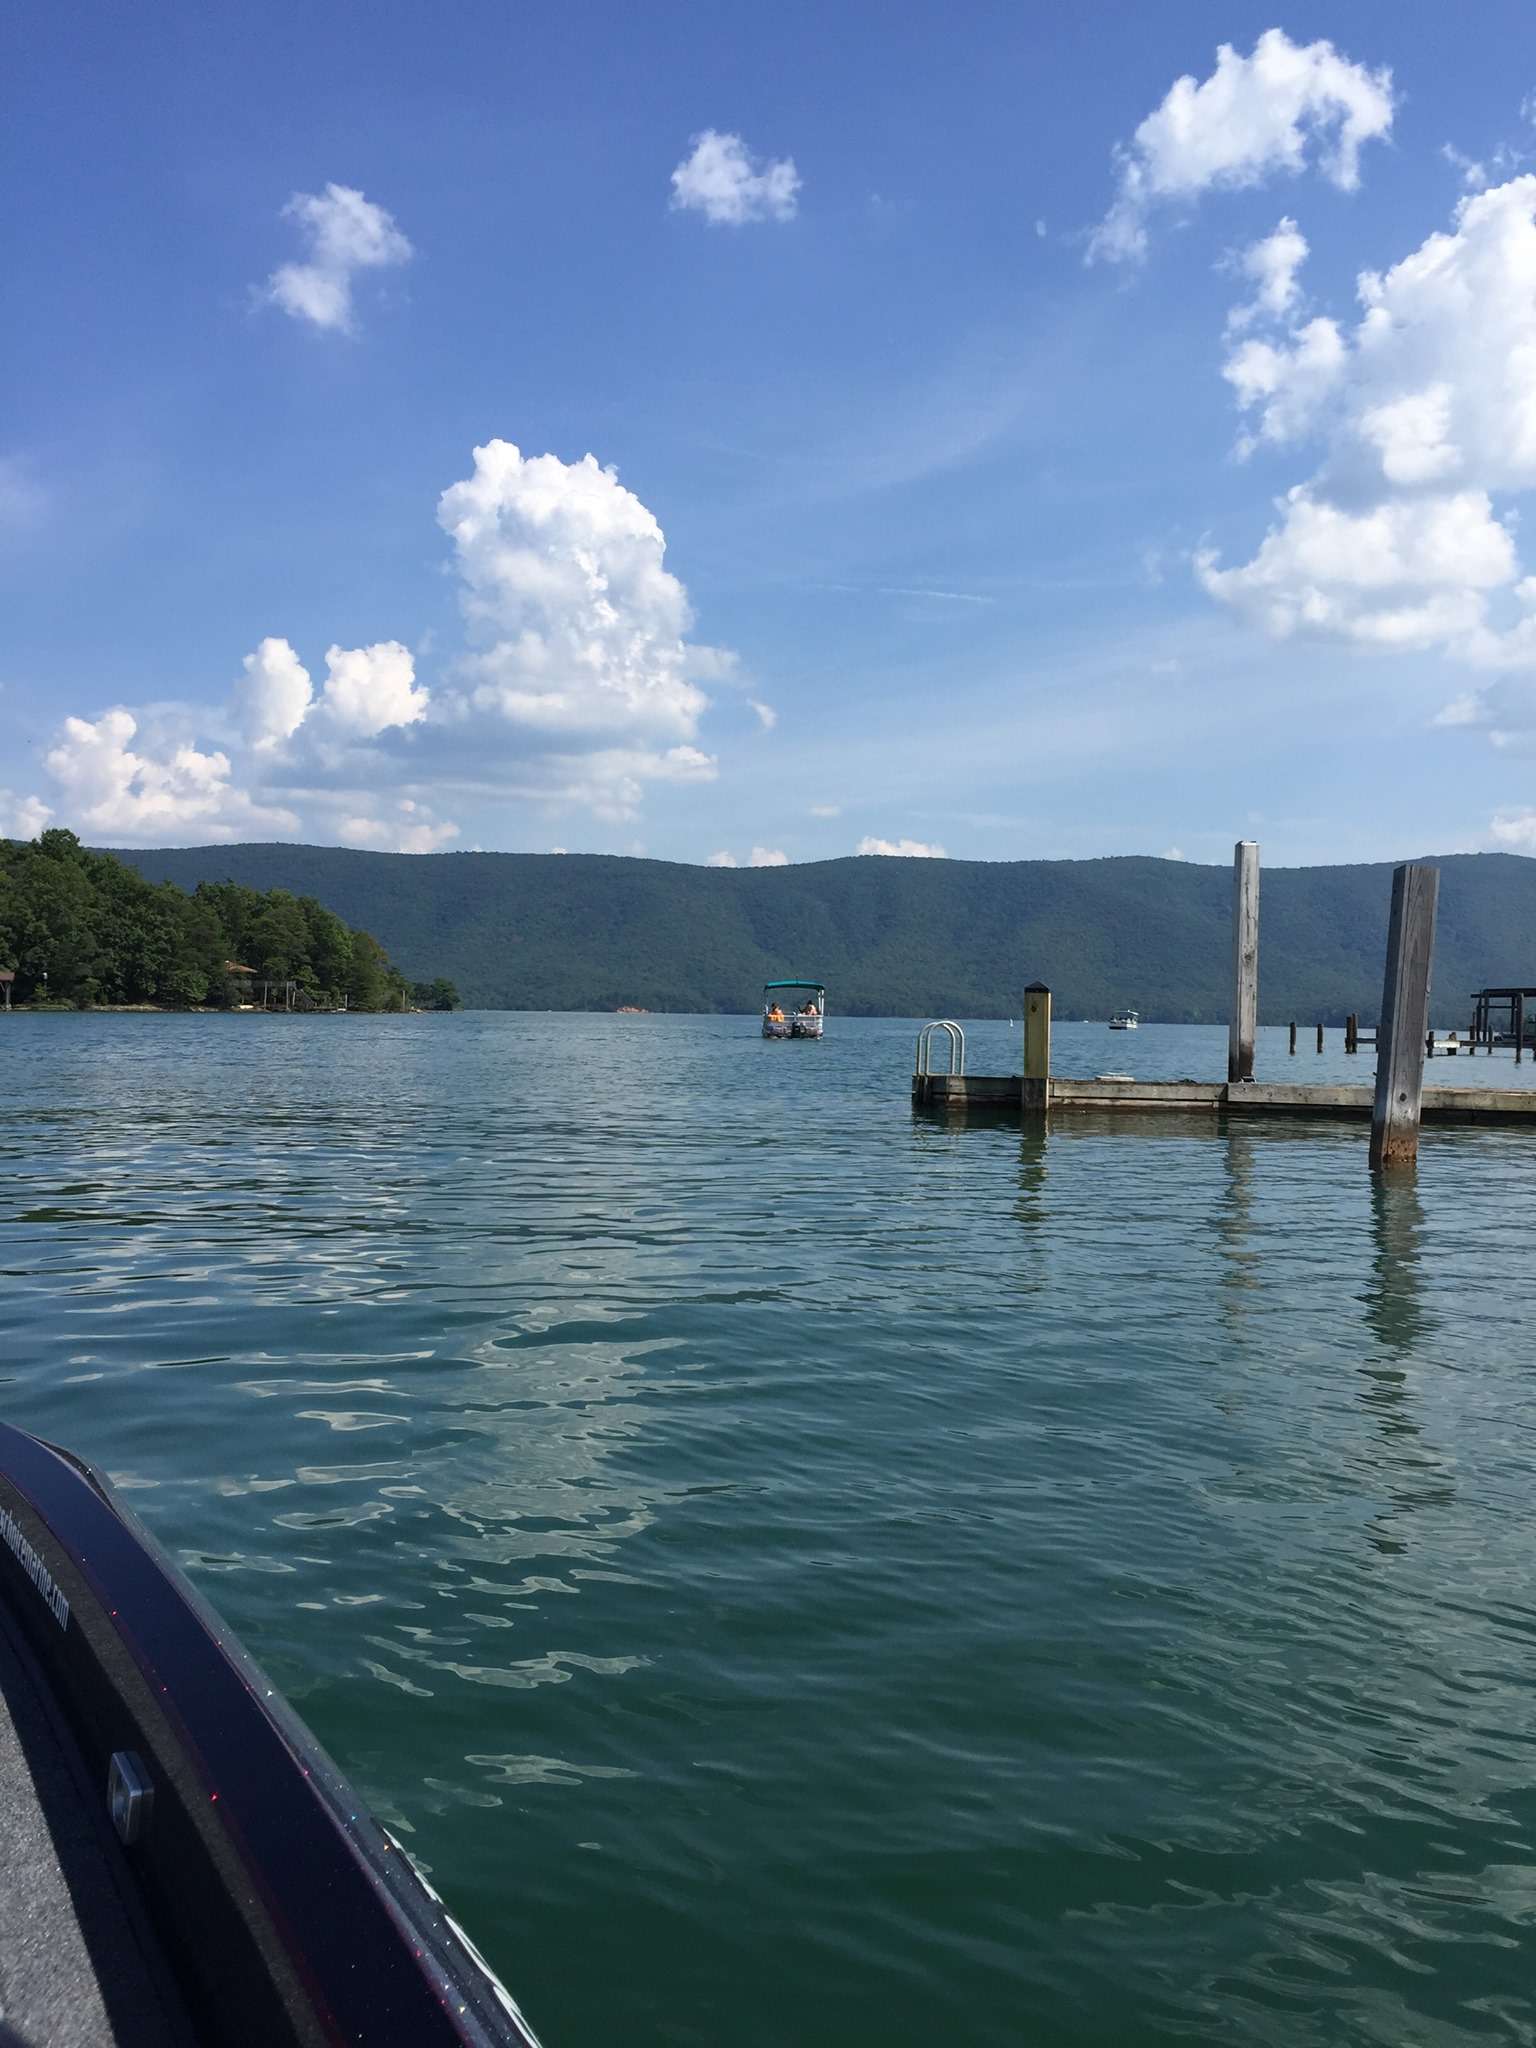 Bryant Copley, Facebook<BR>
Smith Mountain Lake<BR>
Smith Mountain Lake in Virginia. This is the view you see when launching at Parkway Marina. Several Elite tournies here and we hope for a return soon.
